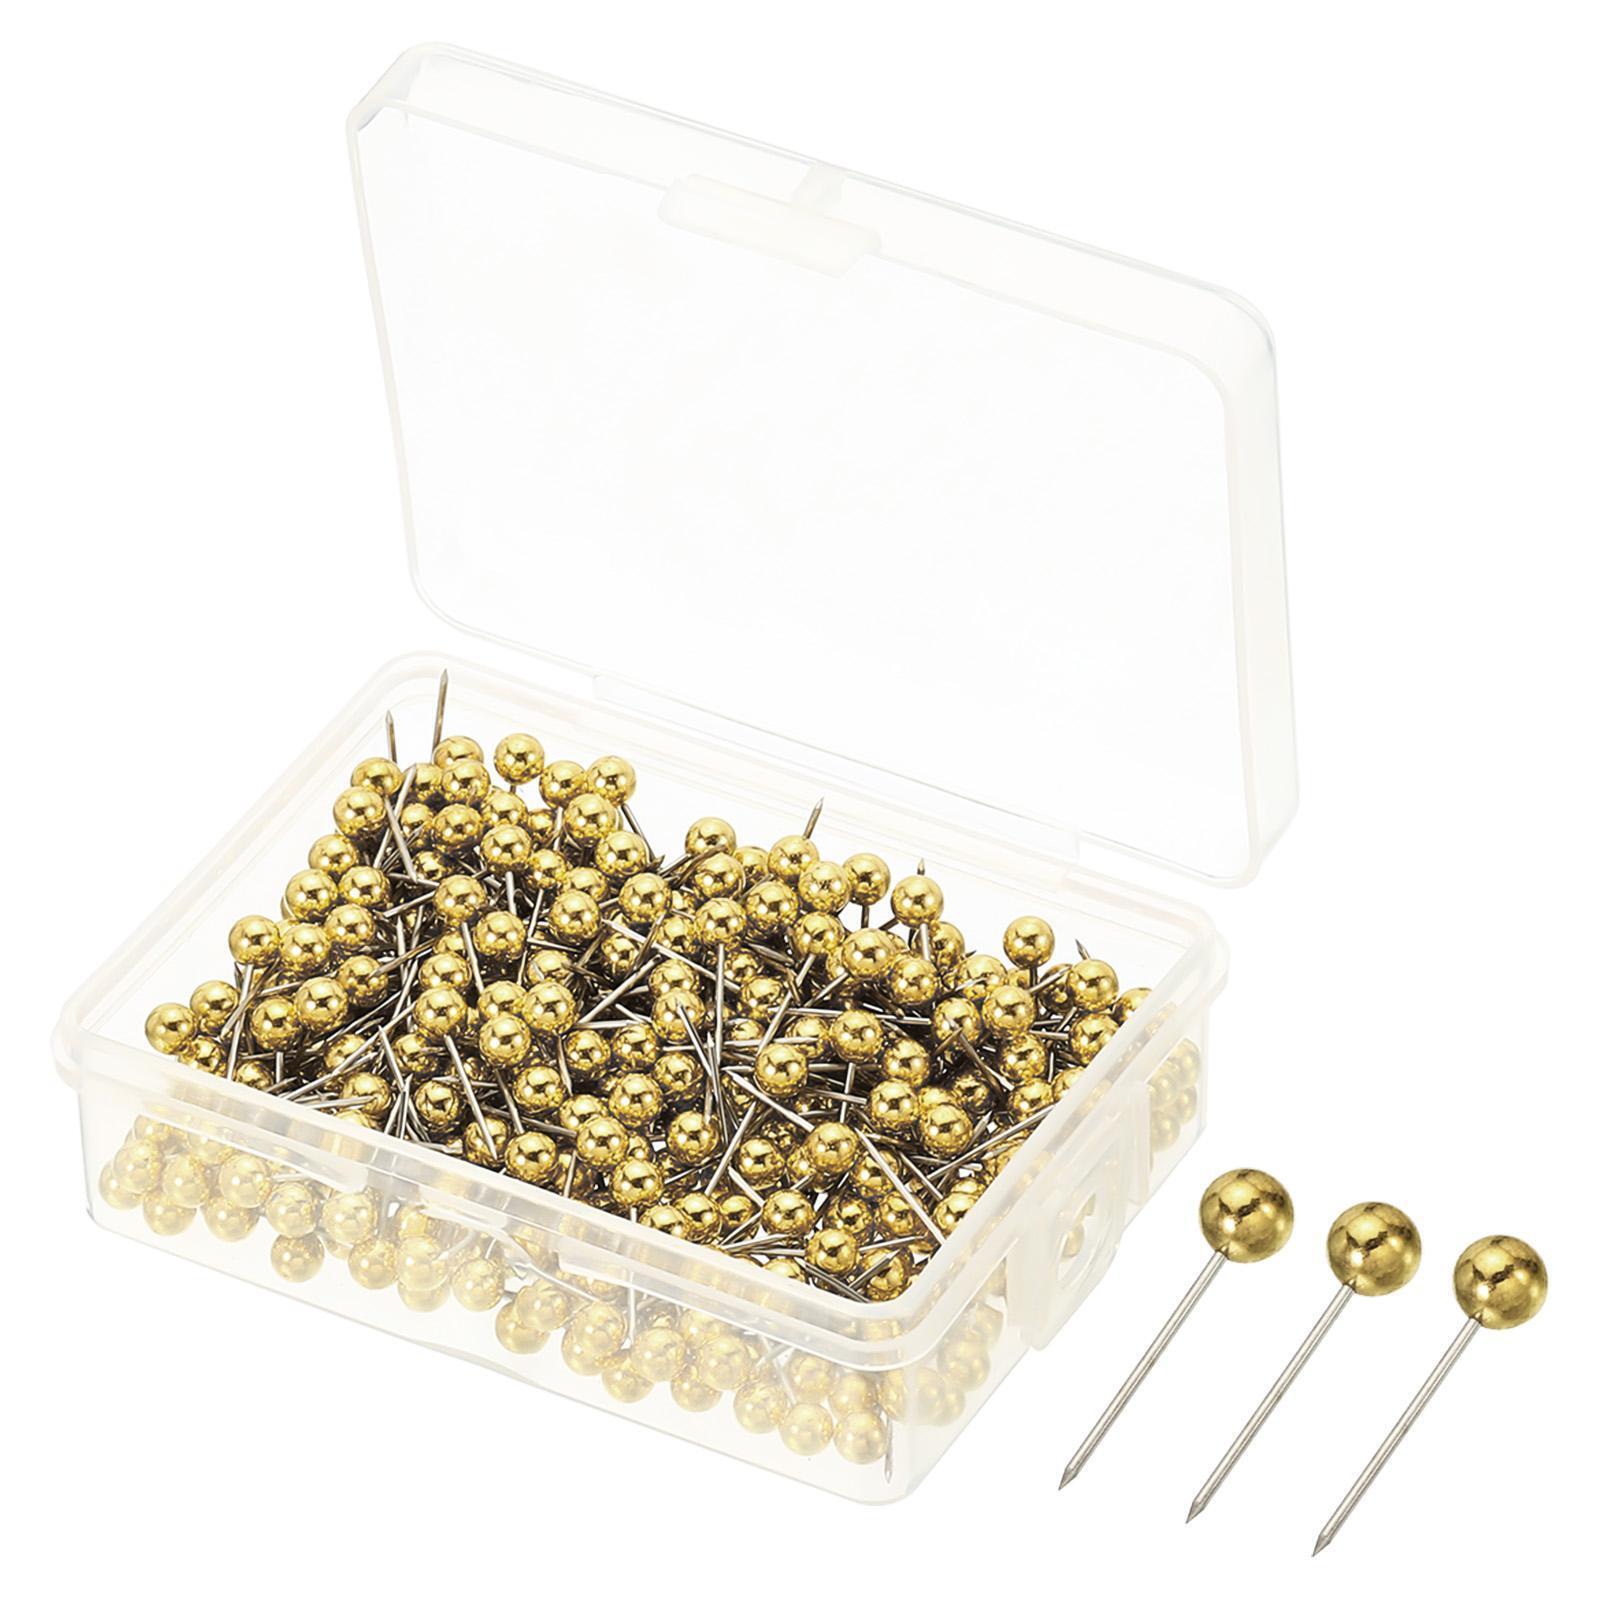 400pcs Push Pins, Round Head Map Tacks Steel Point For Office, Golden